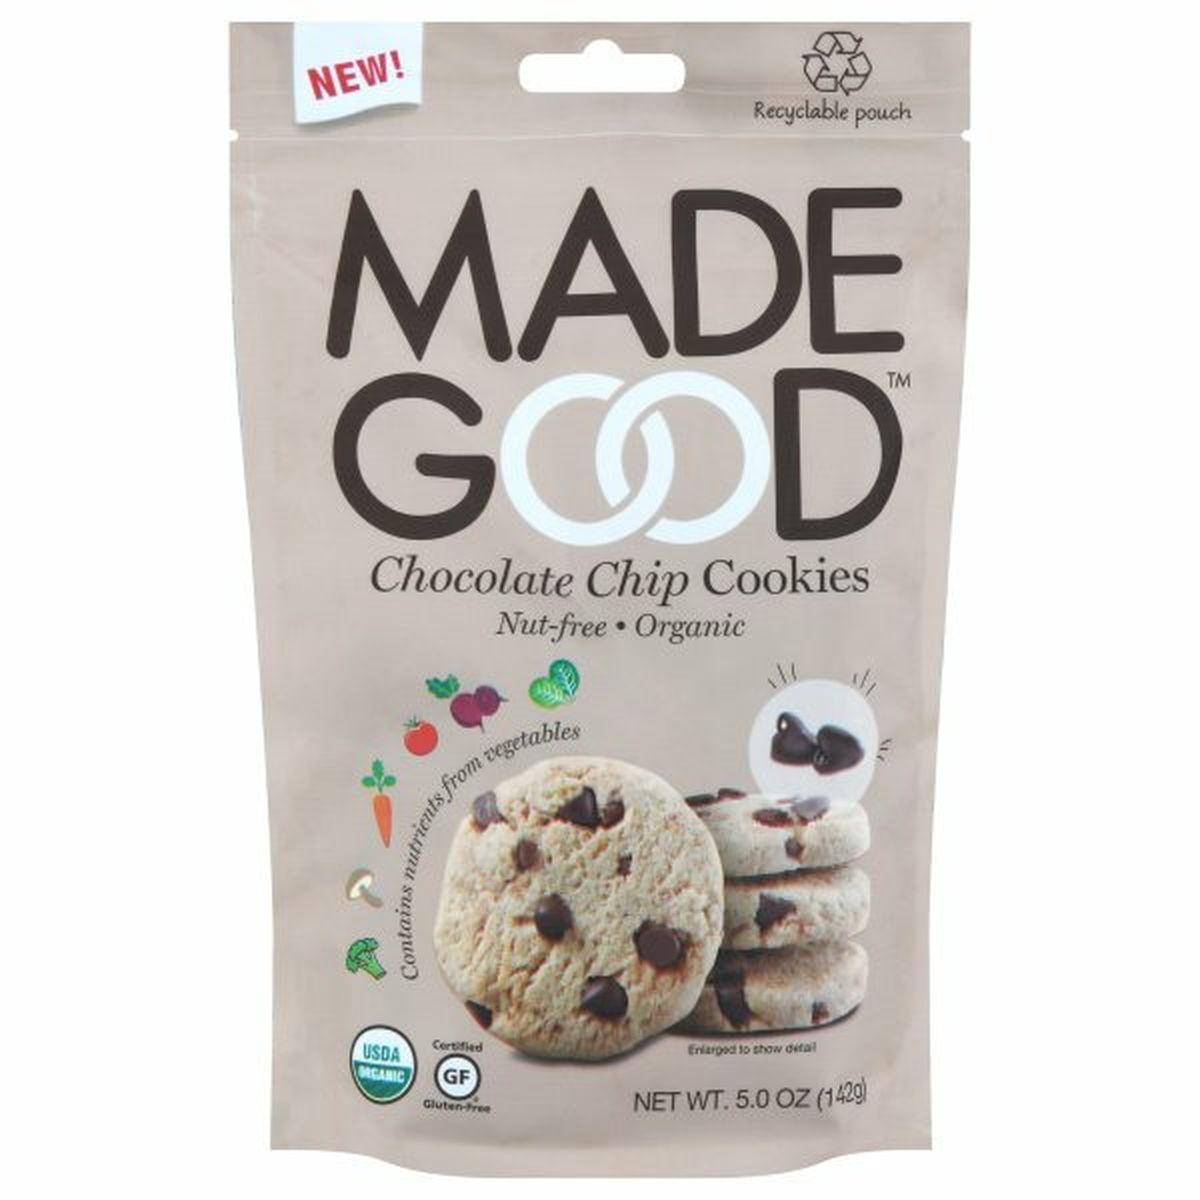 Calories in Made Good Cookies, Chocolate Chip